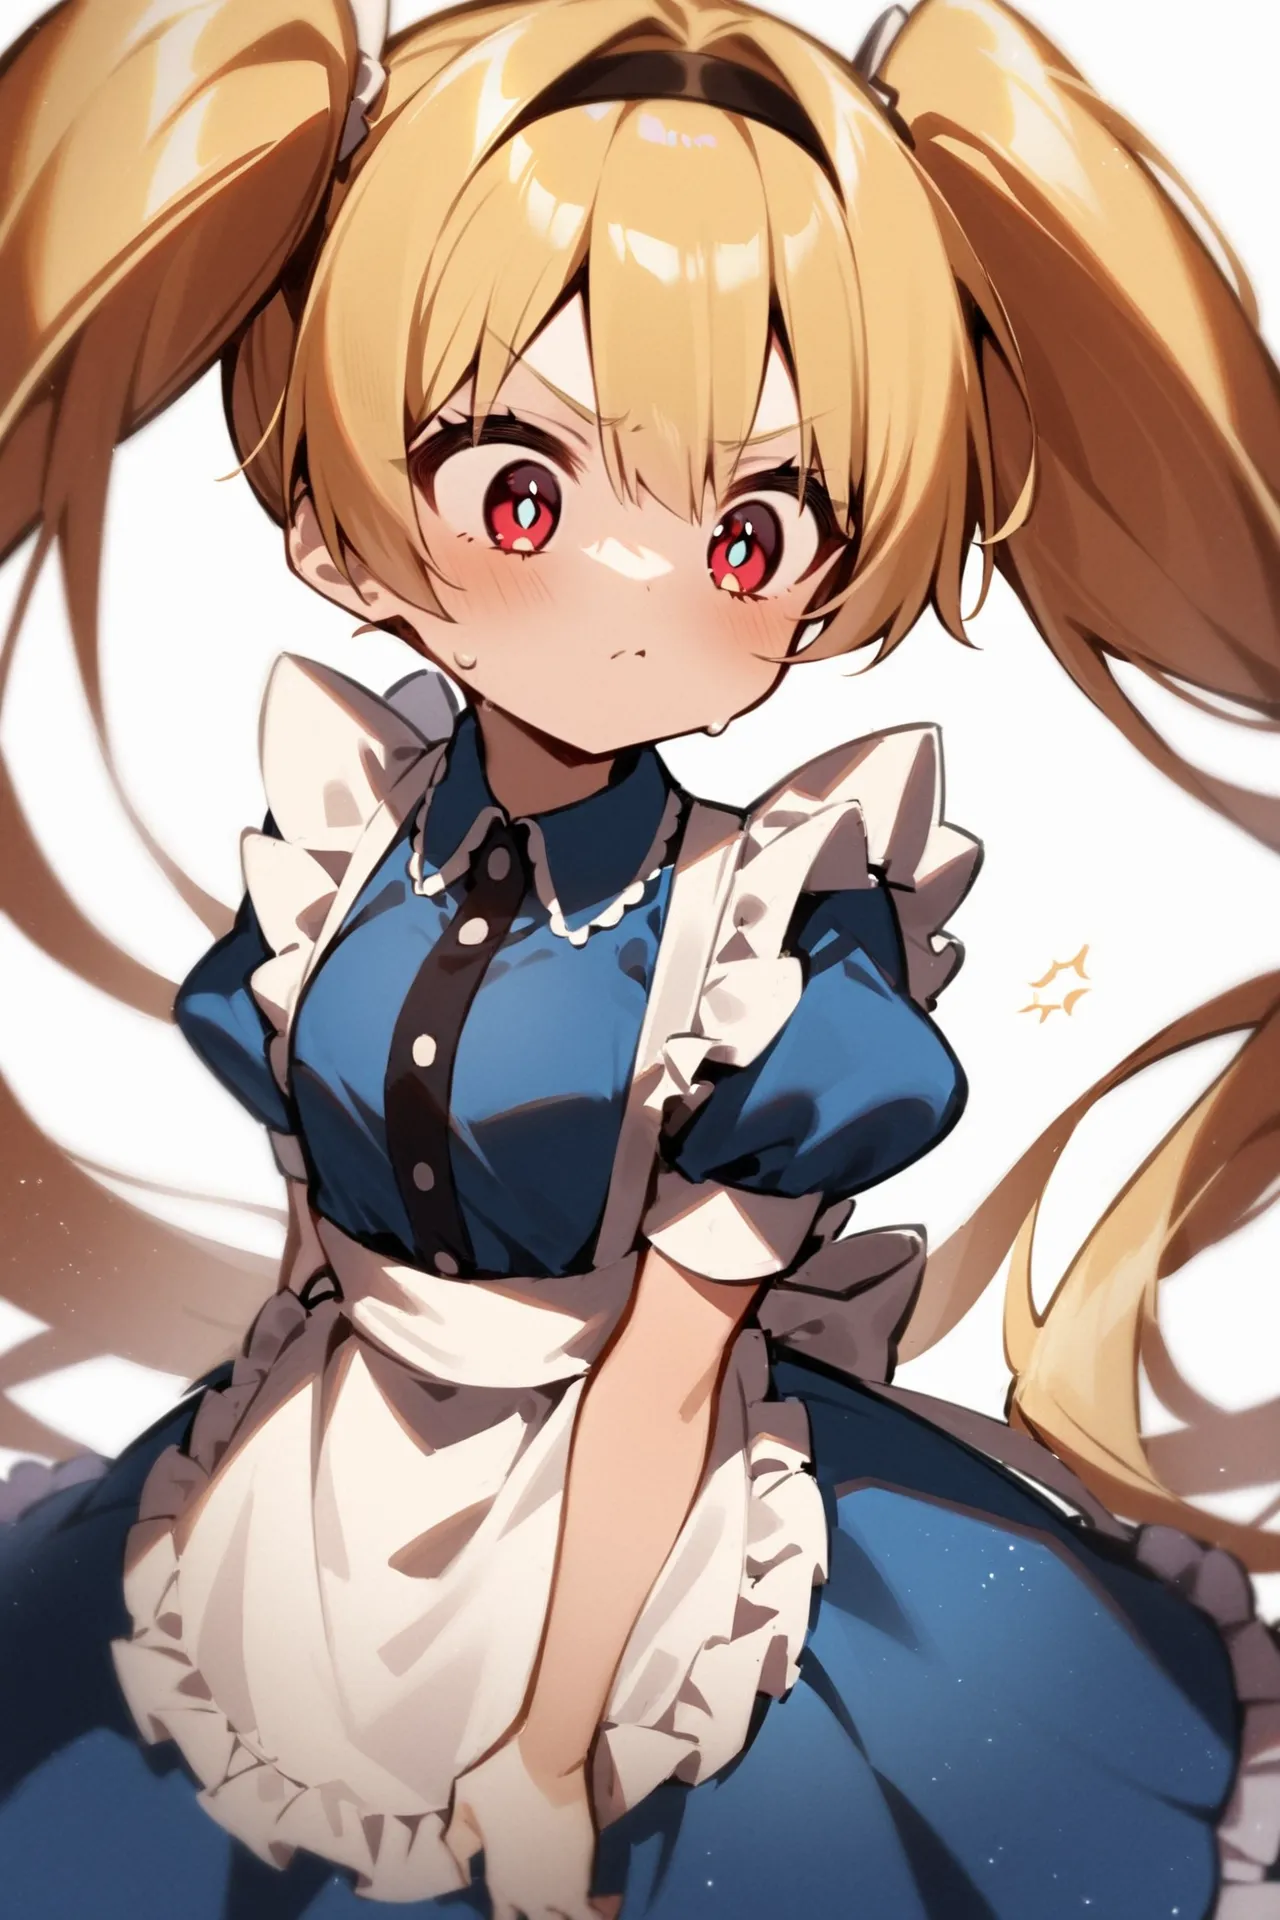 '1girl, tsundere,\nblonde hair, twintails, blue dress, white apron,\nwhite background,\nAlice in glitterworld\nNegative prompt: (worst quality, low quality:1.4), nsfw\nSteps: 35, Sampler: DPM++ 2M SDE Karras, CFG scale: 7, Seed: 1, Size: 640x960, Model hash: 642b08ca49, Model: ConfusionXL2.0_fp16_vae, VAE hash: 63aeecb90f, VAE: sdxl_vae_0.9.safetensors, Denoising strength: 0.6, Clip skip: 2, Hires upscale: 2, Hires steps: 15, Hires upscaler: ESRGAN_4x, Eta: 0.68, Version: v1.7.0'